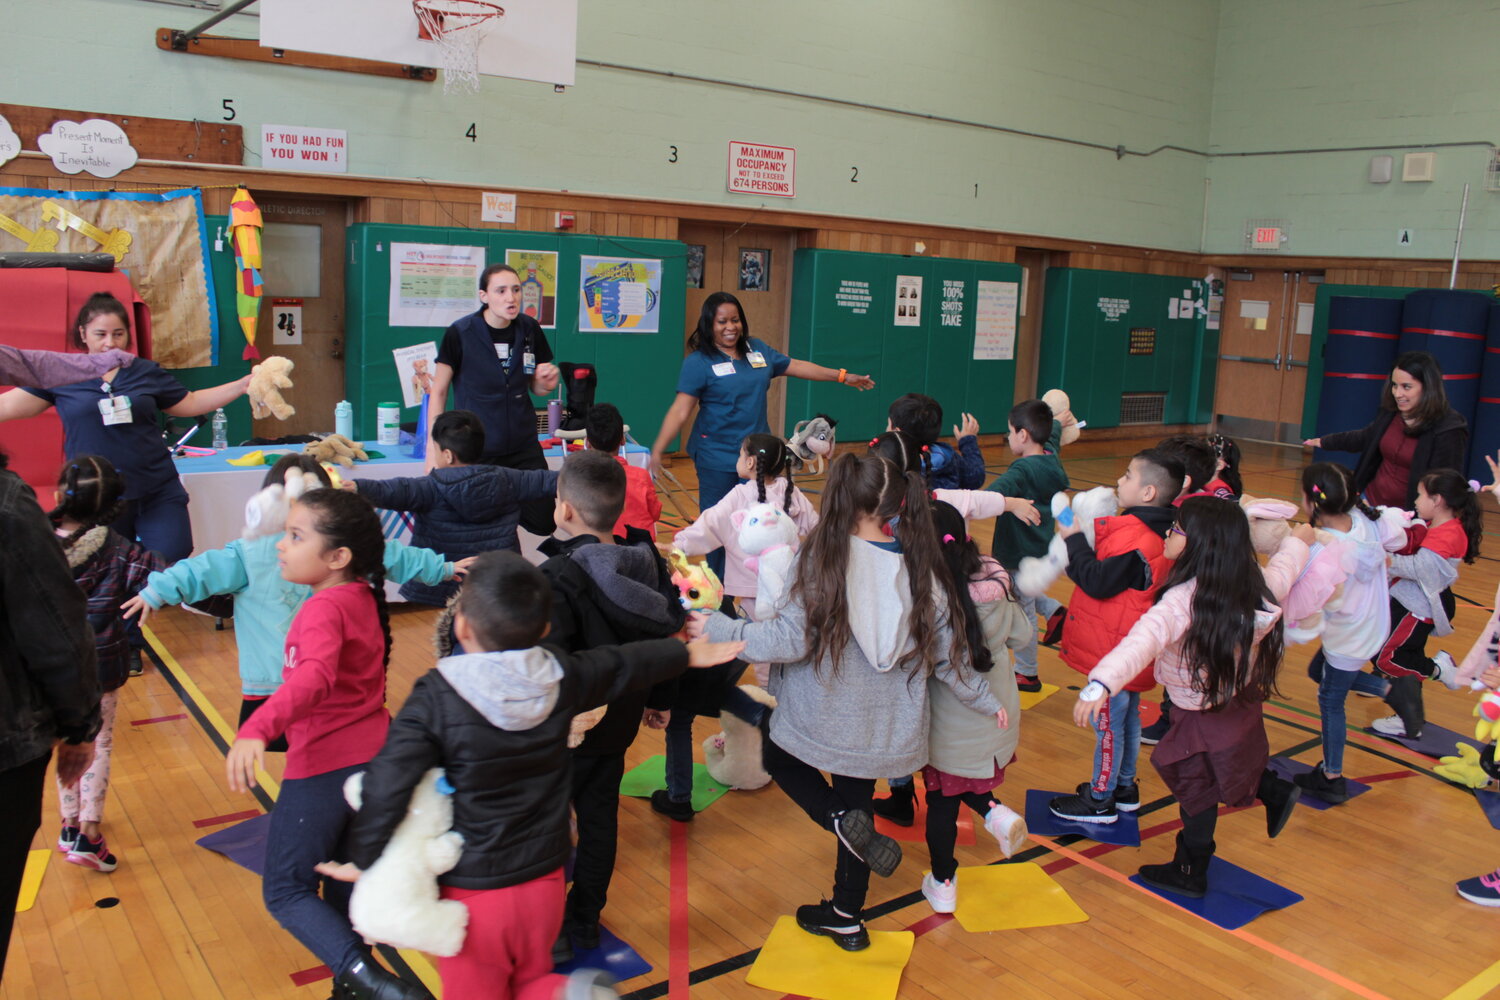 Kindergarten students brought their stuffed animals to the Teddy Bear Clinic sponsored by Mount Sinai-South Nassau Hospital at Bayview Avenue Elementary School for hands-on interactive medical training.